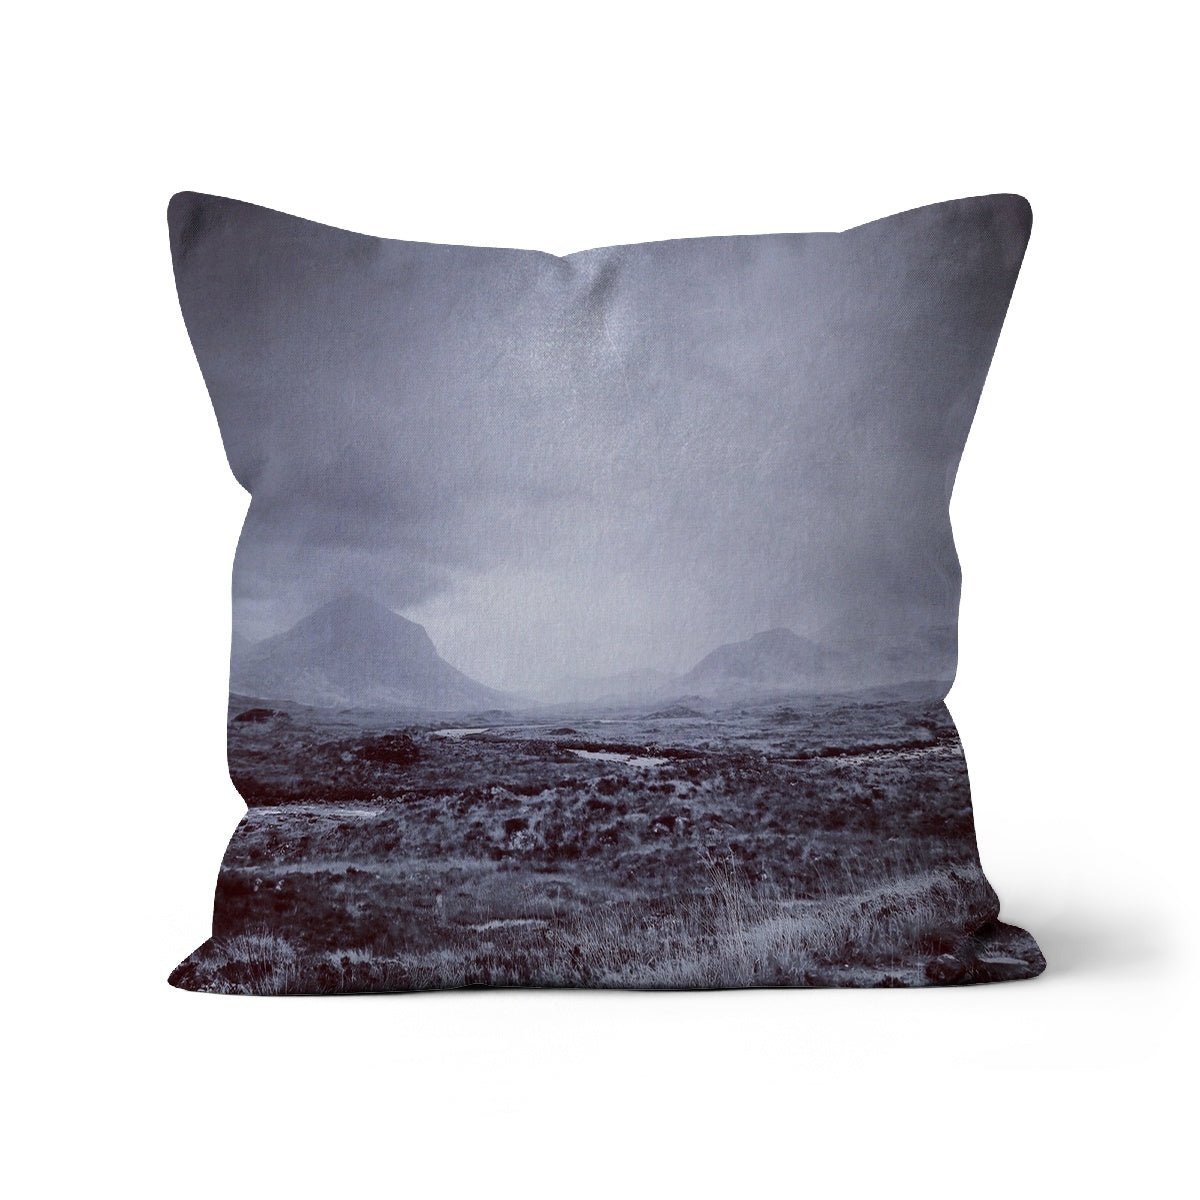 The Brooding Cuillin Skye Art Gifts Cushion-Cushions-Skye Art Gallery-Linen-22"x22"-Paintings, Prints, Homeware, Art Gifts From Scotland By Scottish Artist Kevin Hunter